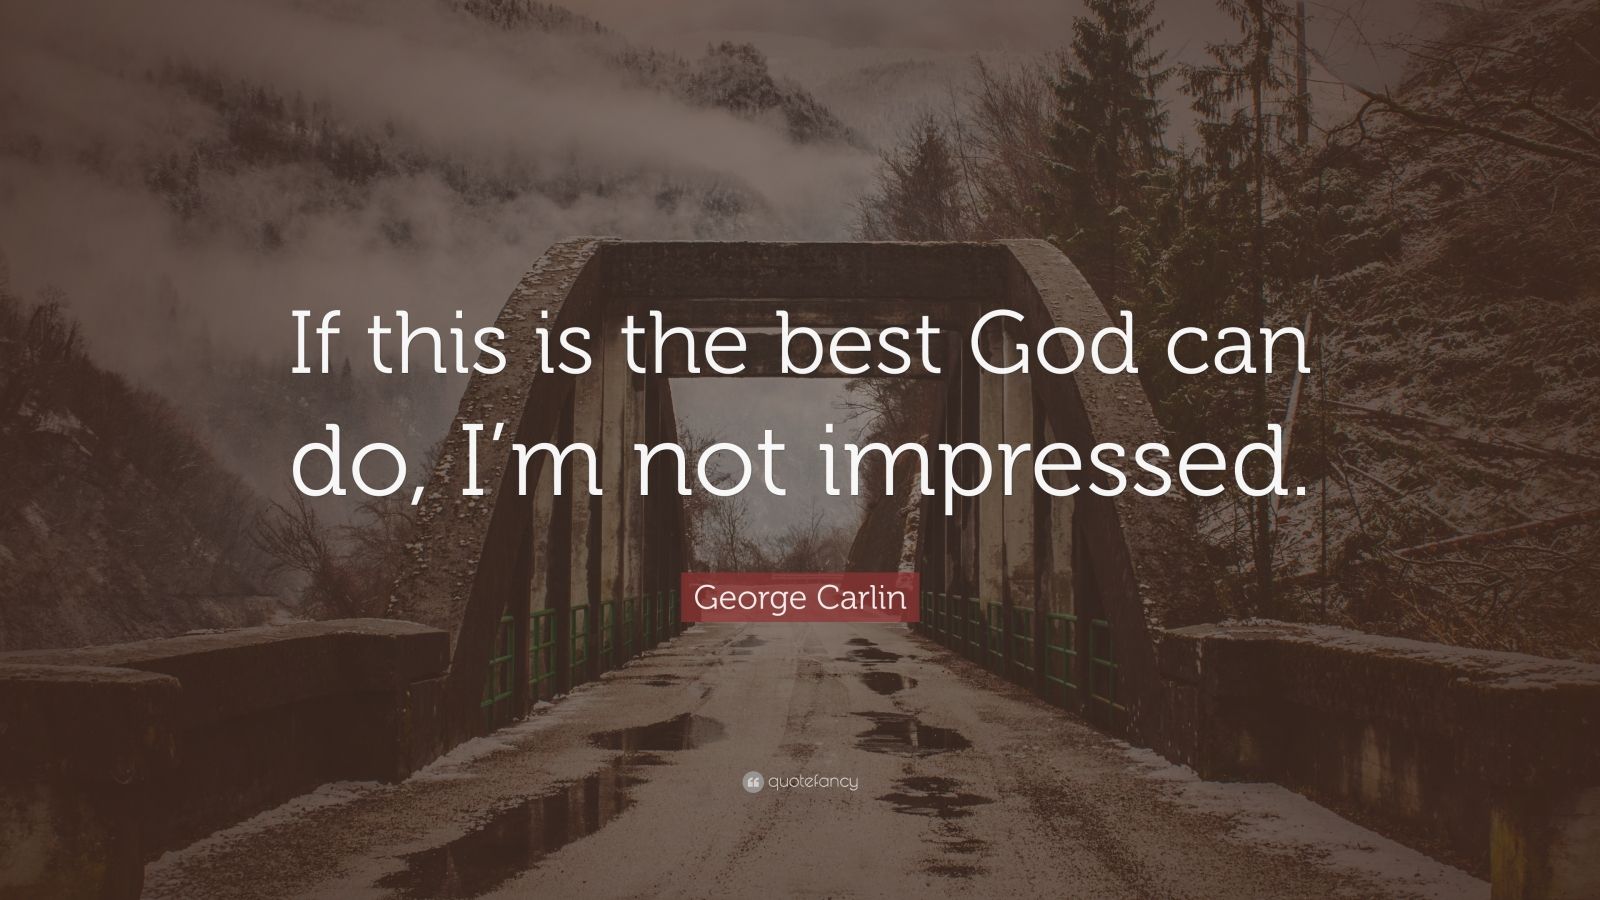 George Carlin Quote: “If this is the best God can do, I’m not impressed ...